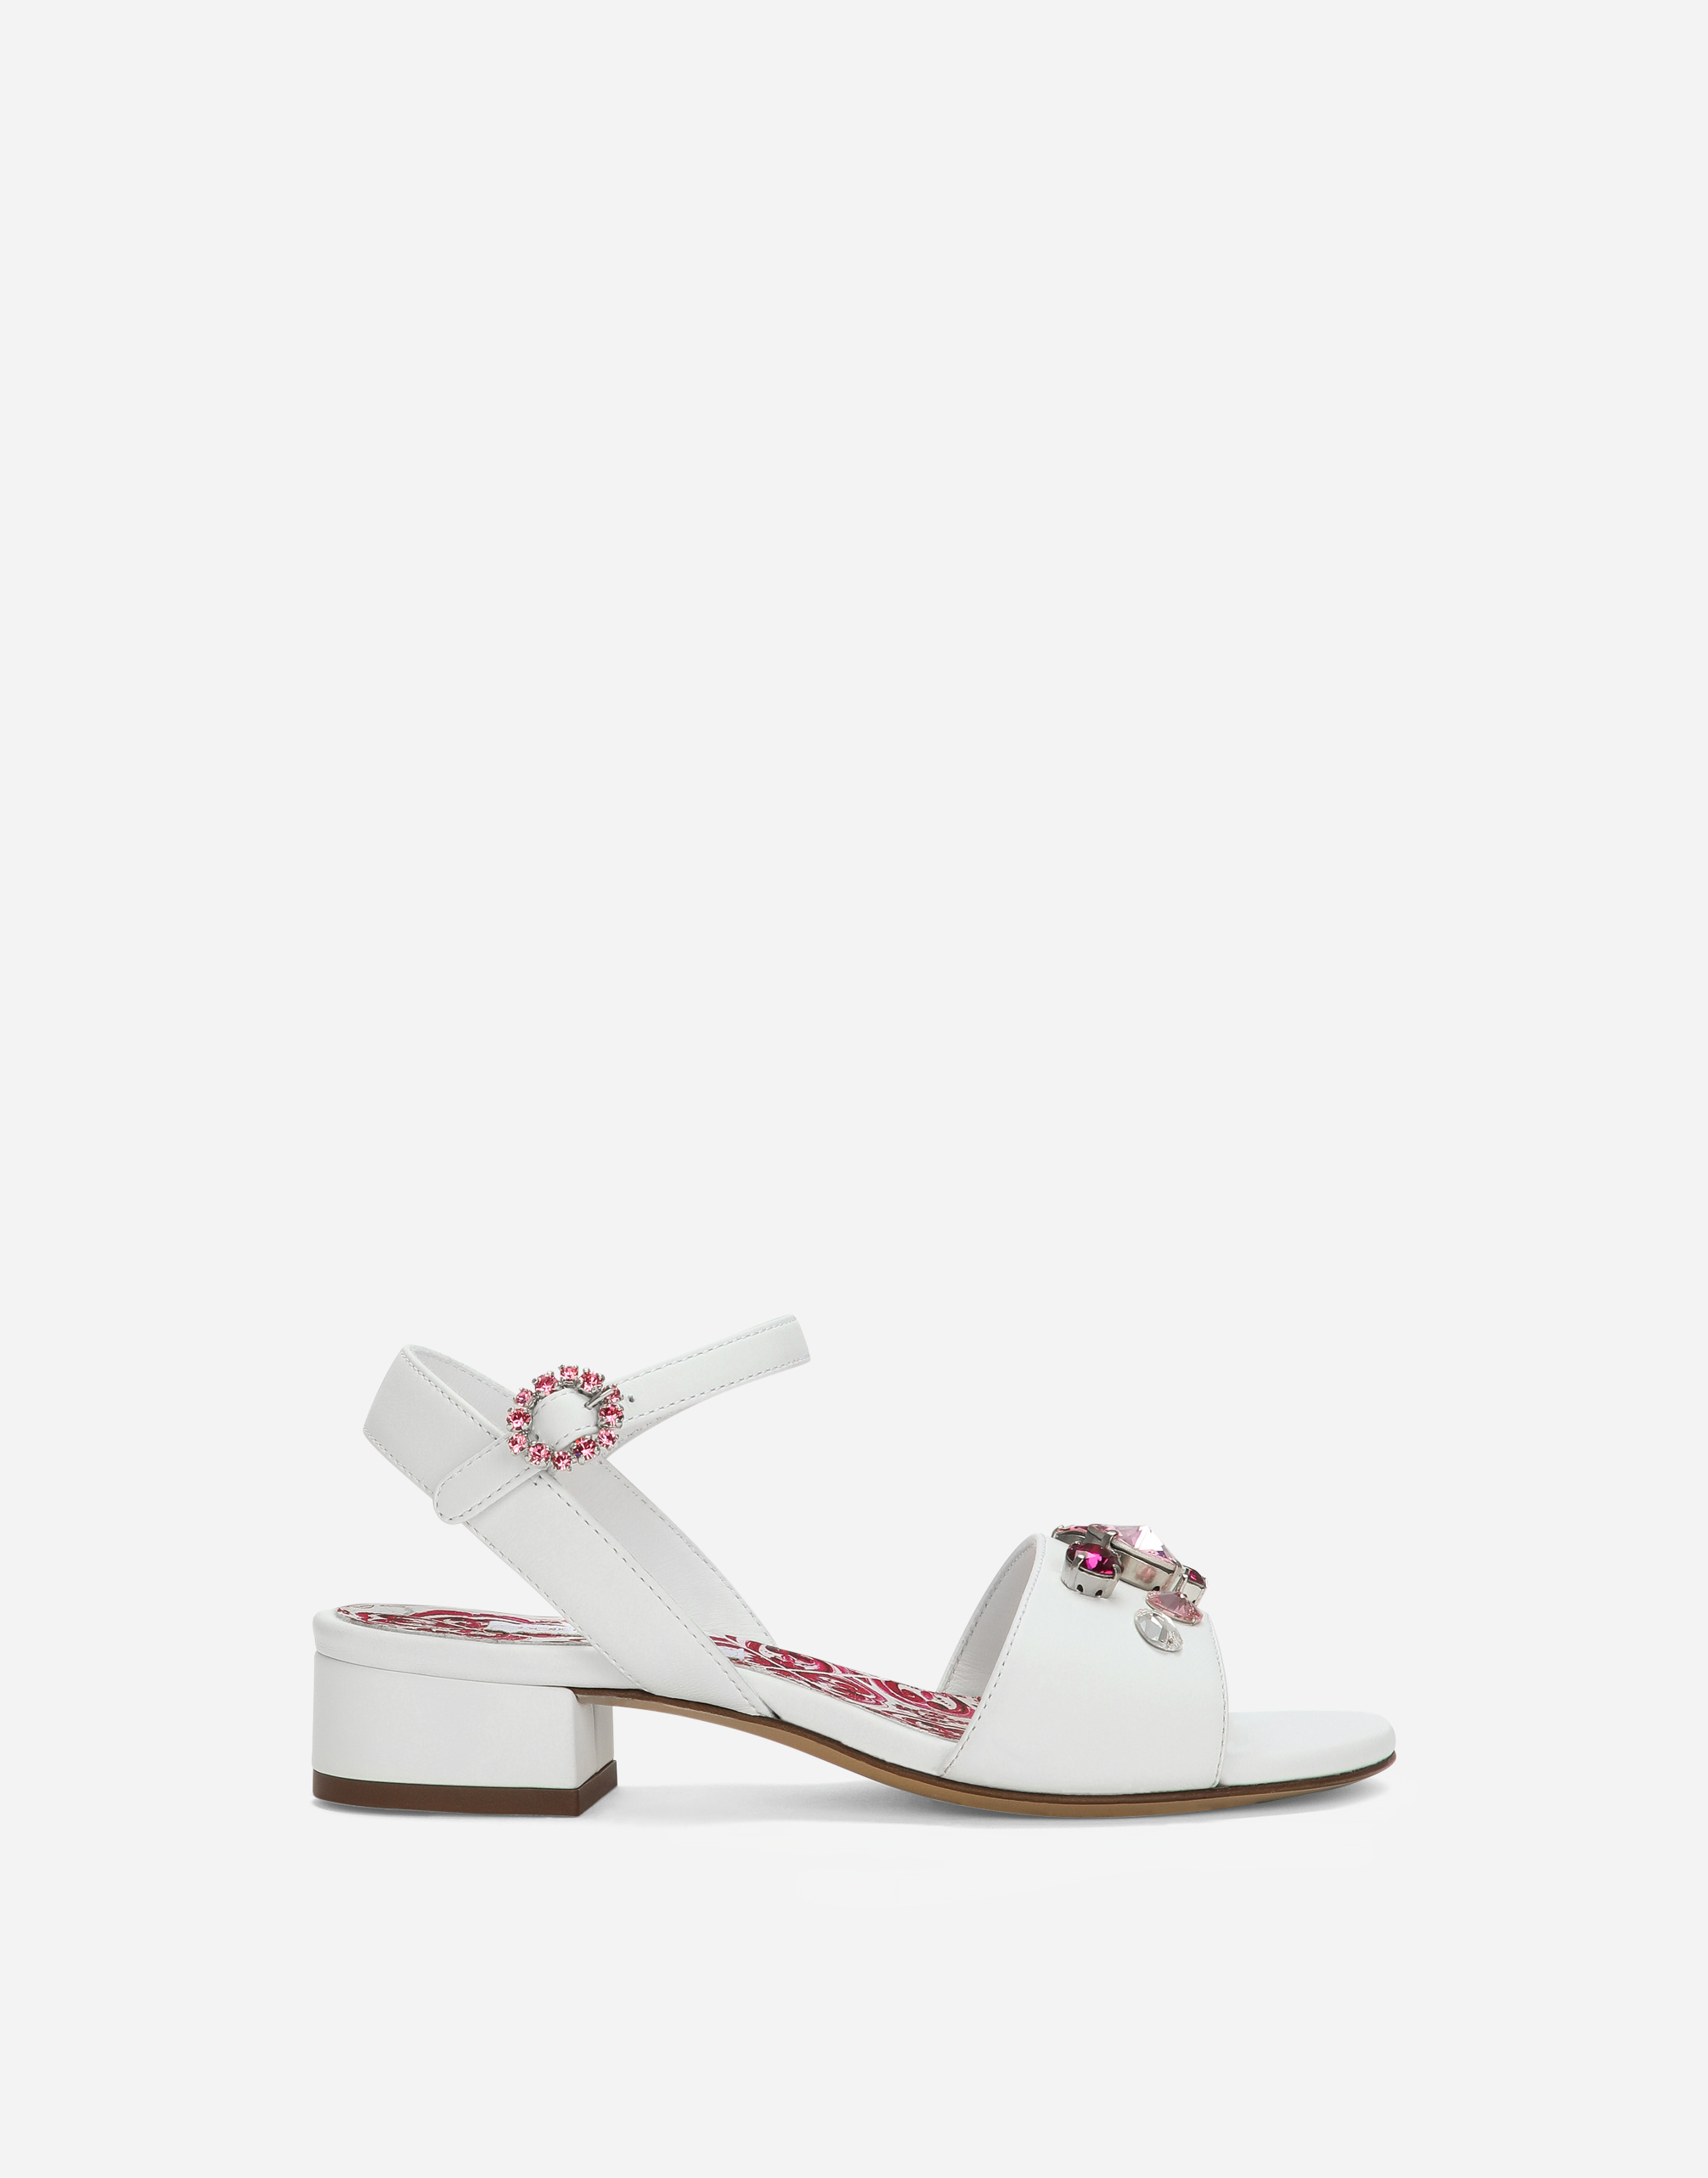 Nappa leather sandals with embroidery in Multicolor